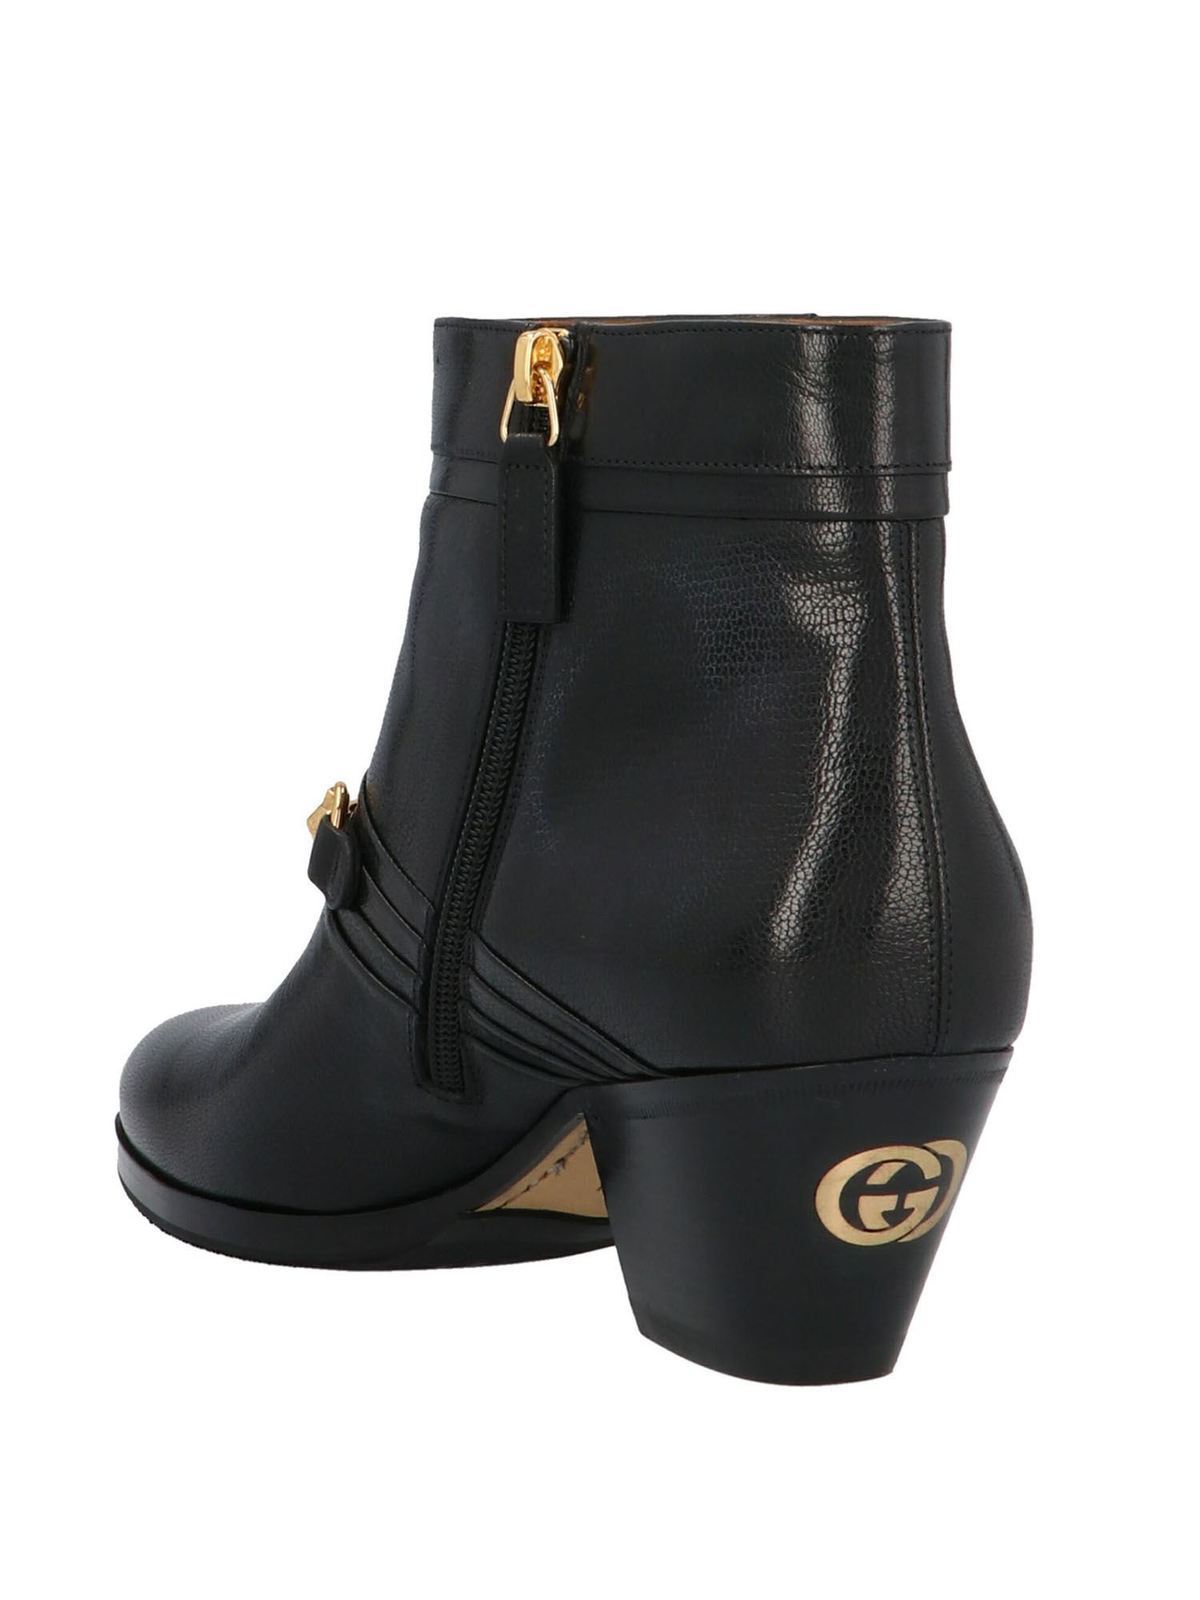 gucci women's black leather ankle boots